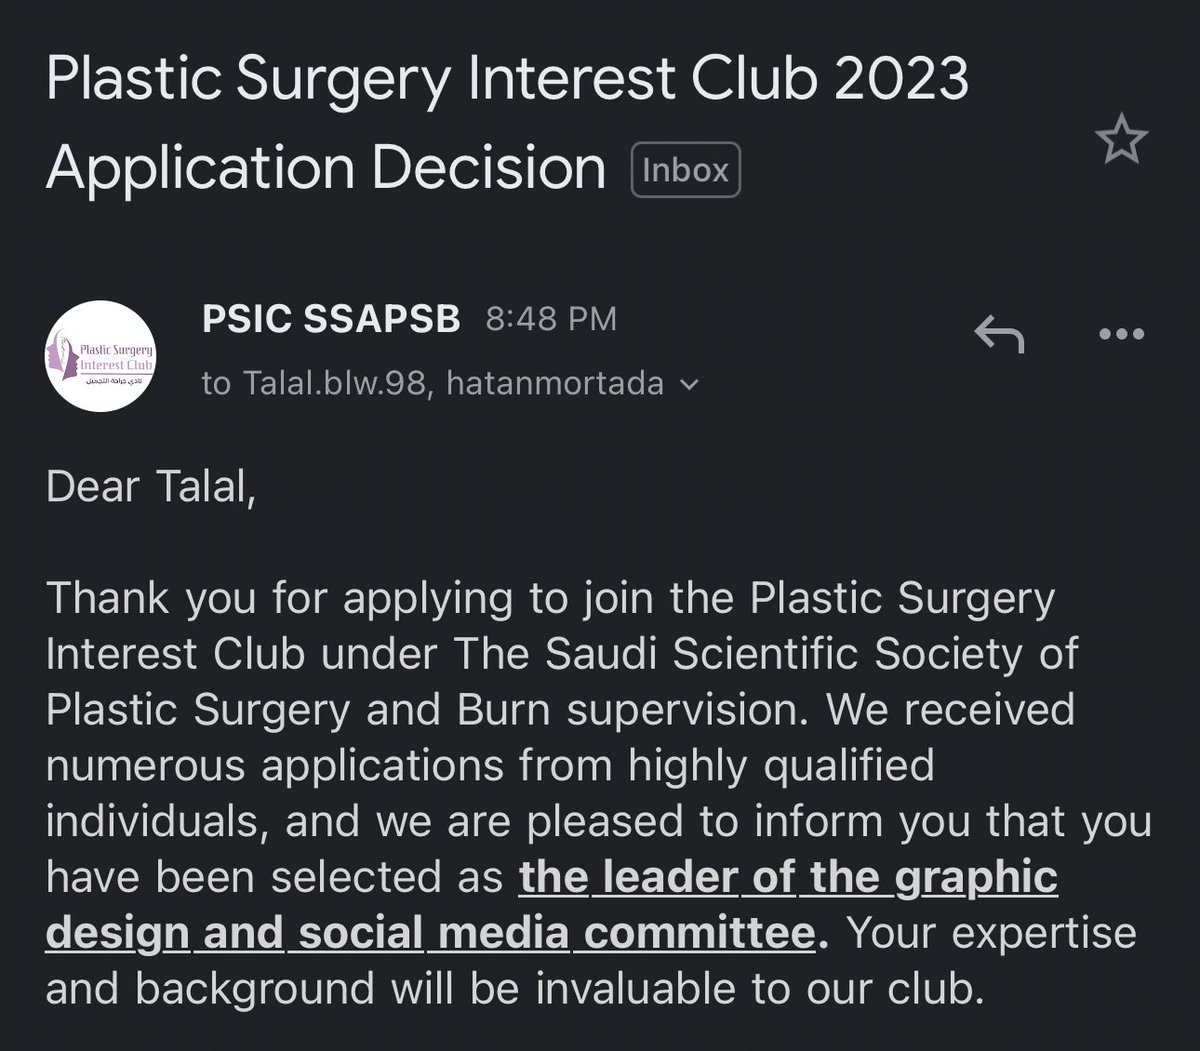 Pleased to join @PSIC_SSAPSB team 😍

Excited for this experience, and looking forward to it !